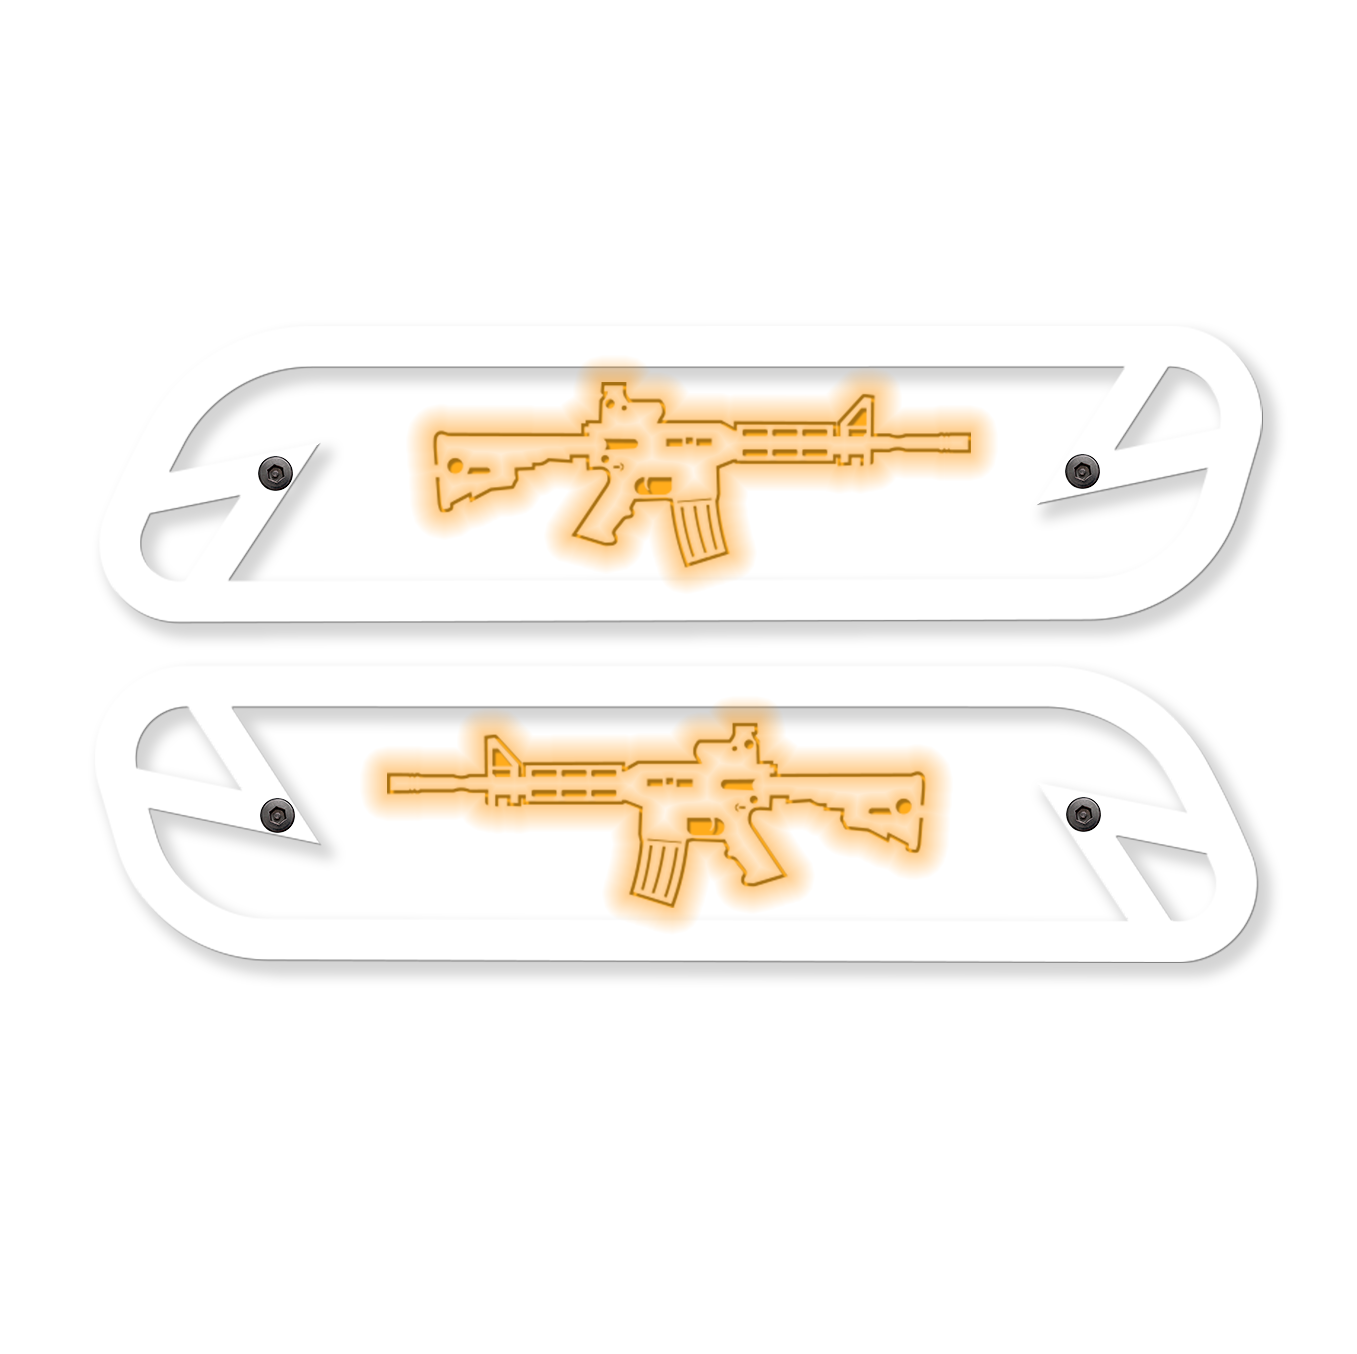 AR15 Hood Emblem Replacements - Fits 2019-2022 Ram® 2500, 3500, 4500 - Fully Customizable, LED or Non-LED